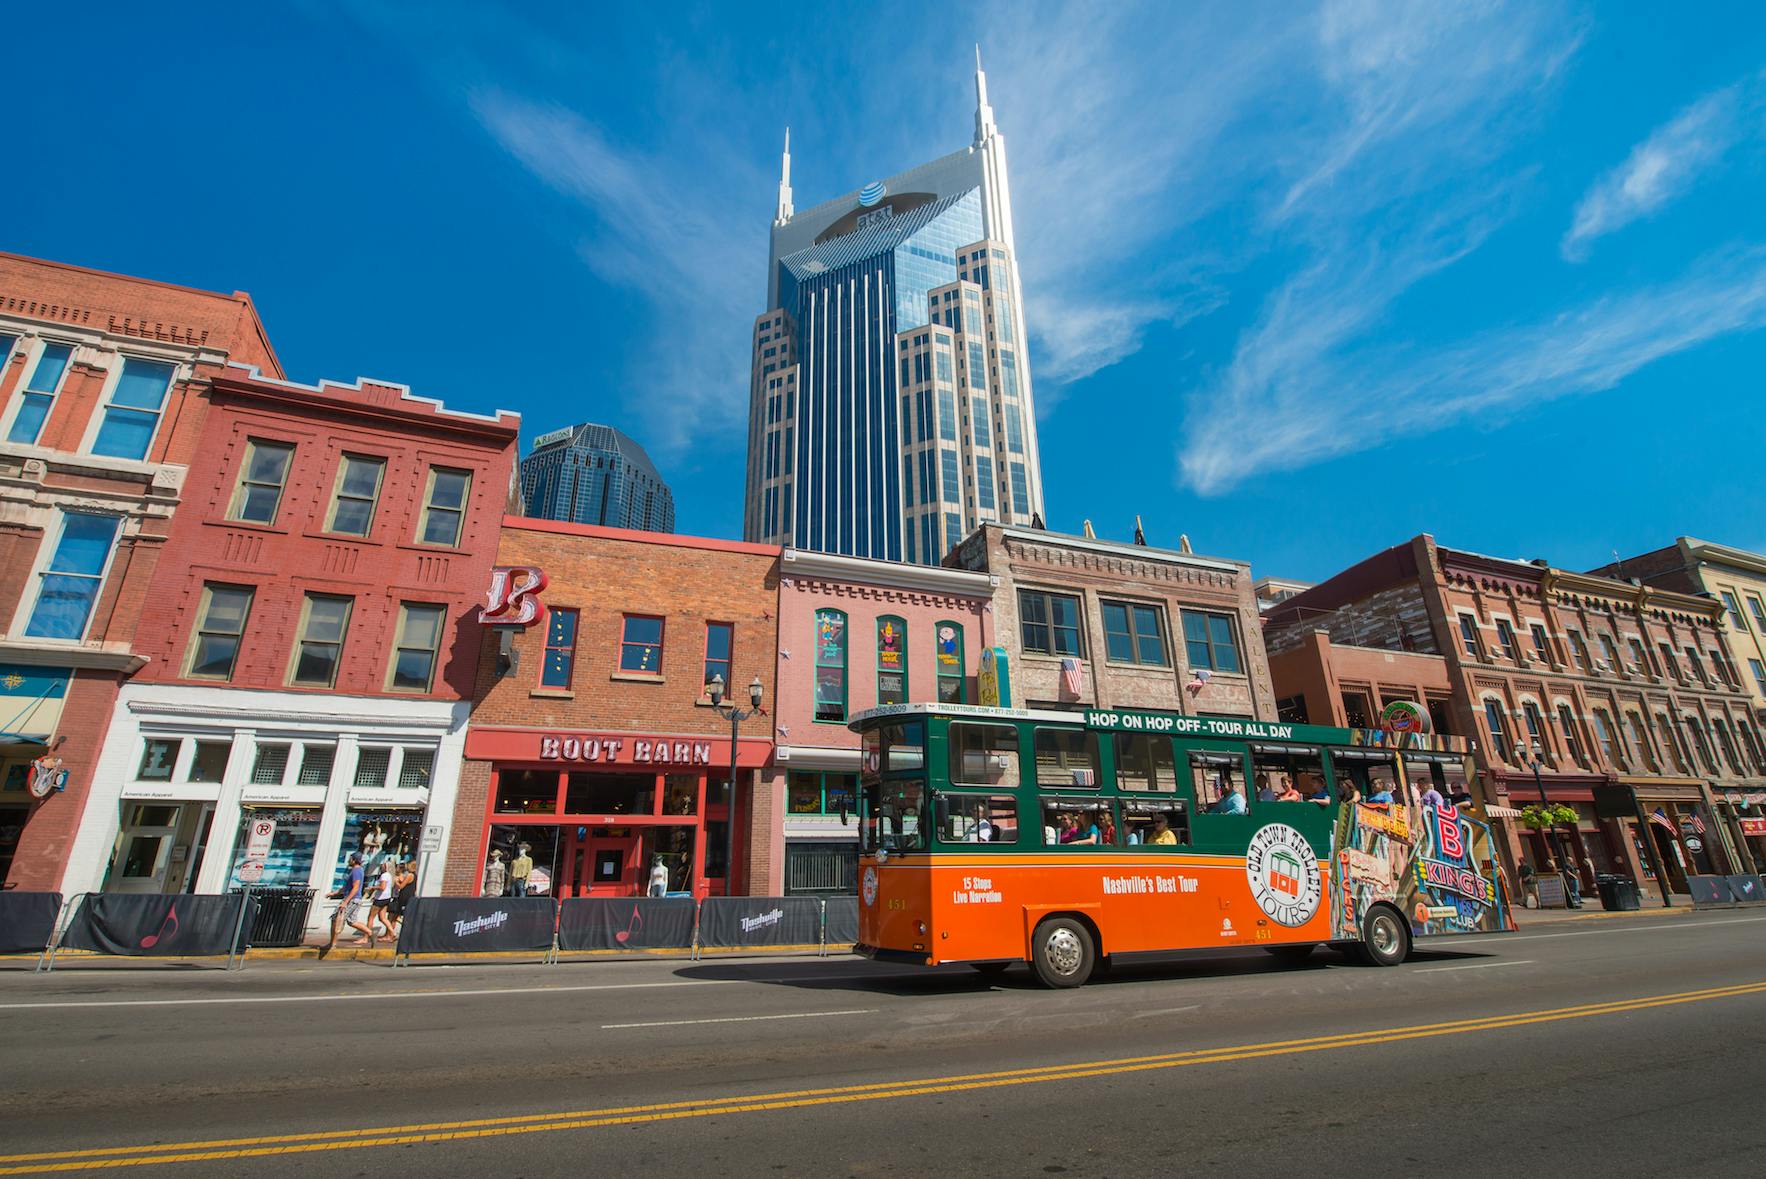 Circle Nash pass with trolley tour, Johnny Cash Museum, and NMAAM